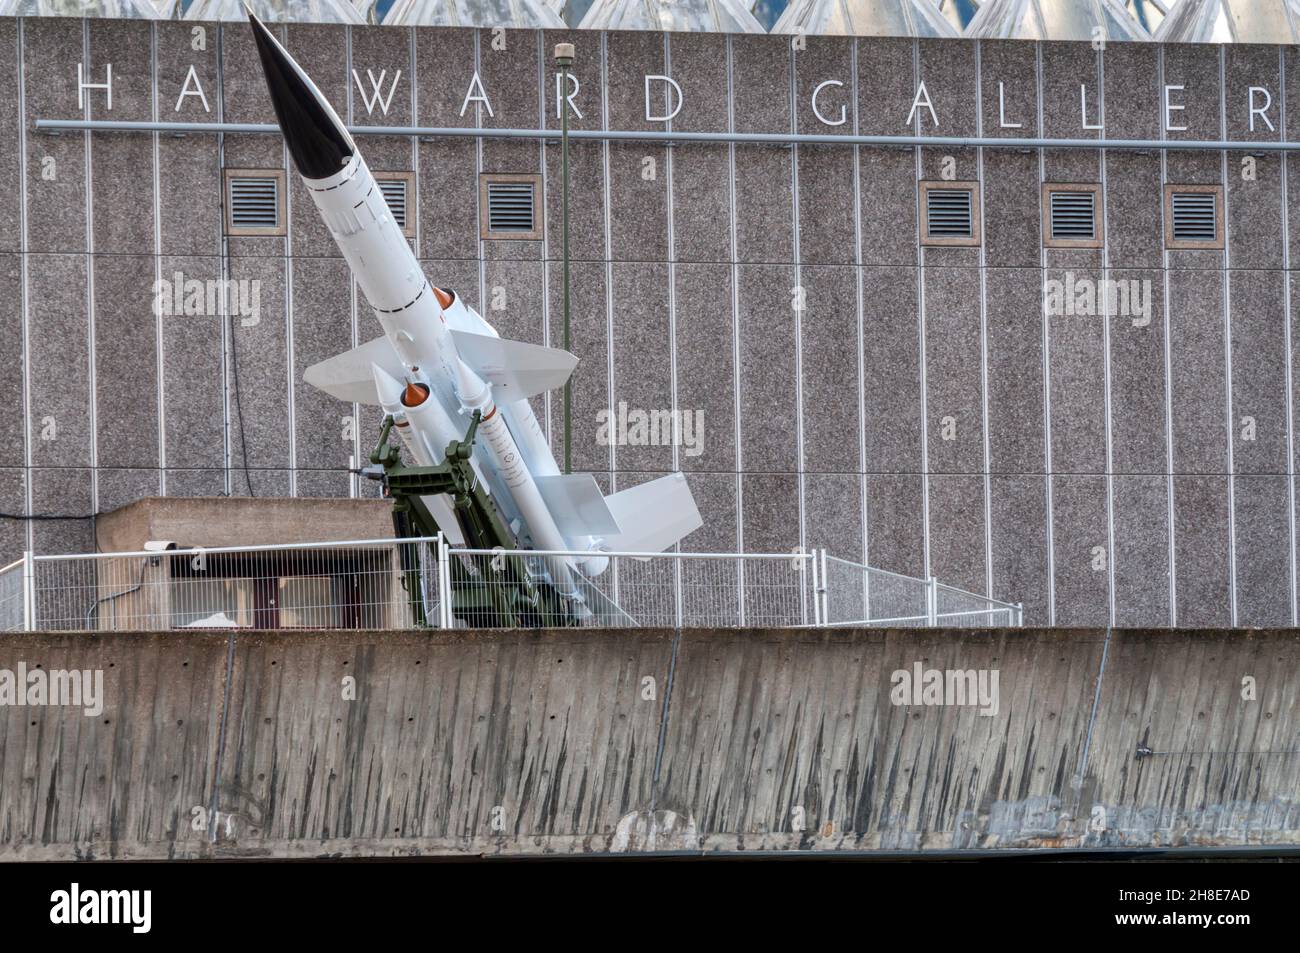 Missile at the Hayward Gallery as part of History Is Now exhibition in the run-up to the 2015 General Election. Exhibit curated by Richard Wentworth. Stock Photo